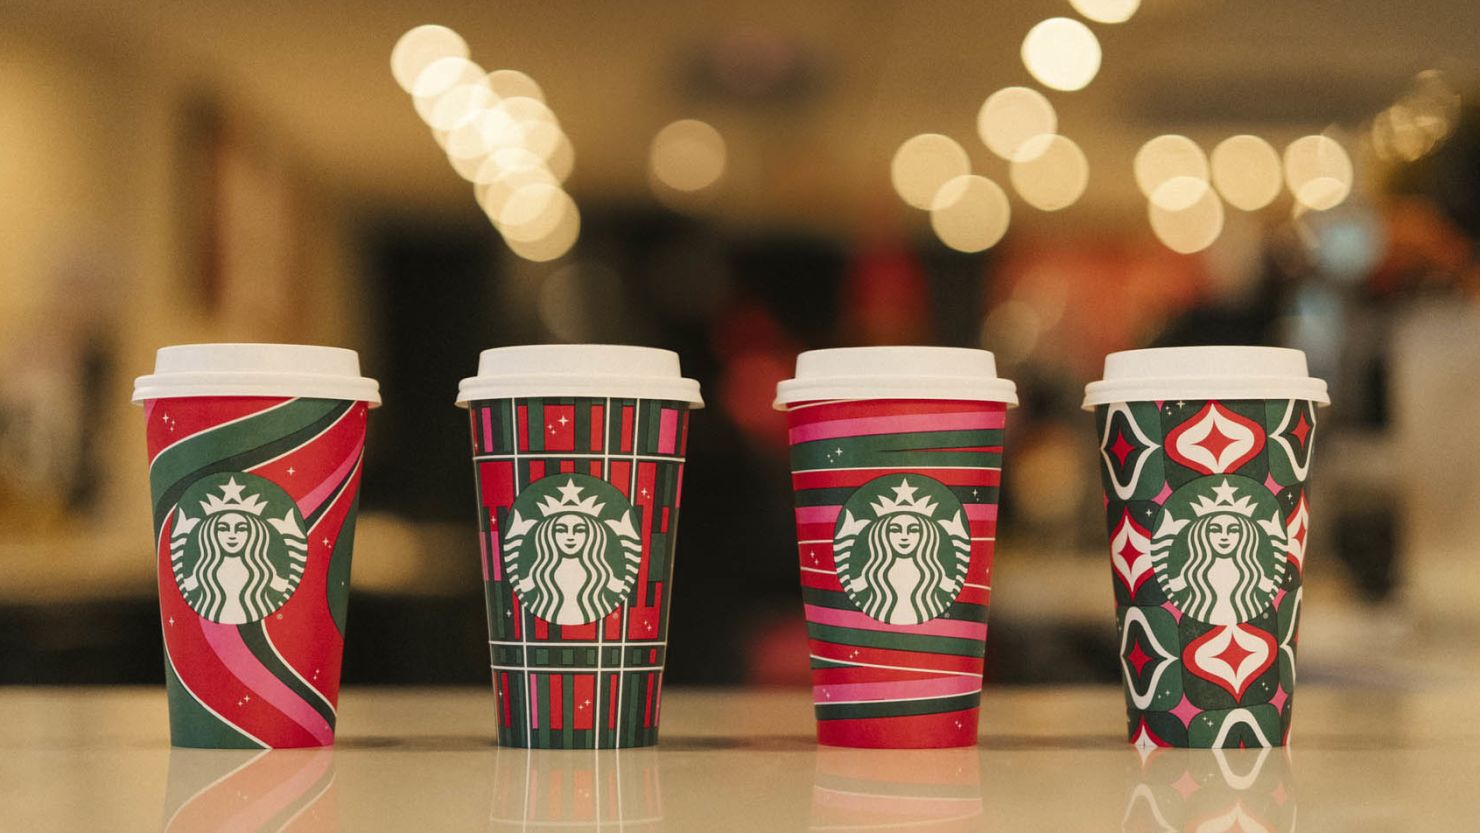 Here's what this year's Starbucks holiday cups look like